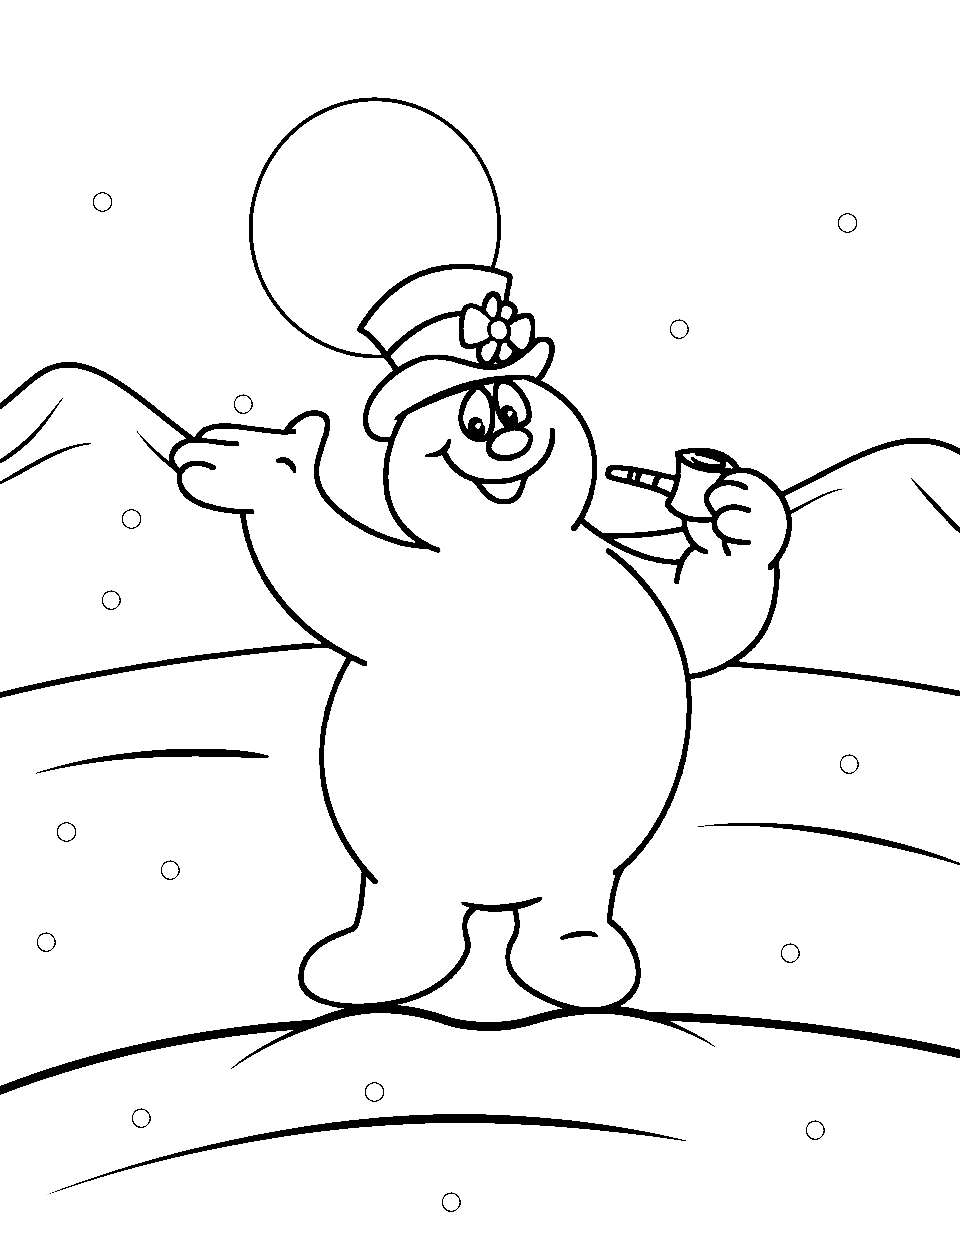 Frosty the Snowman Coloring Page - Frosty standing in a snowy field with the sun rising in the background.